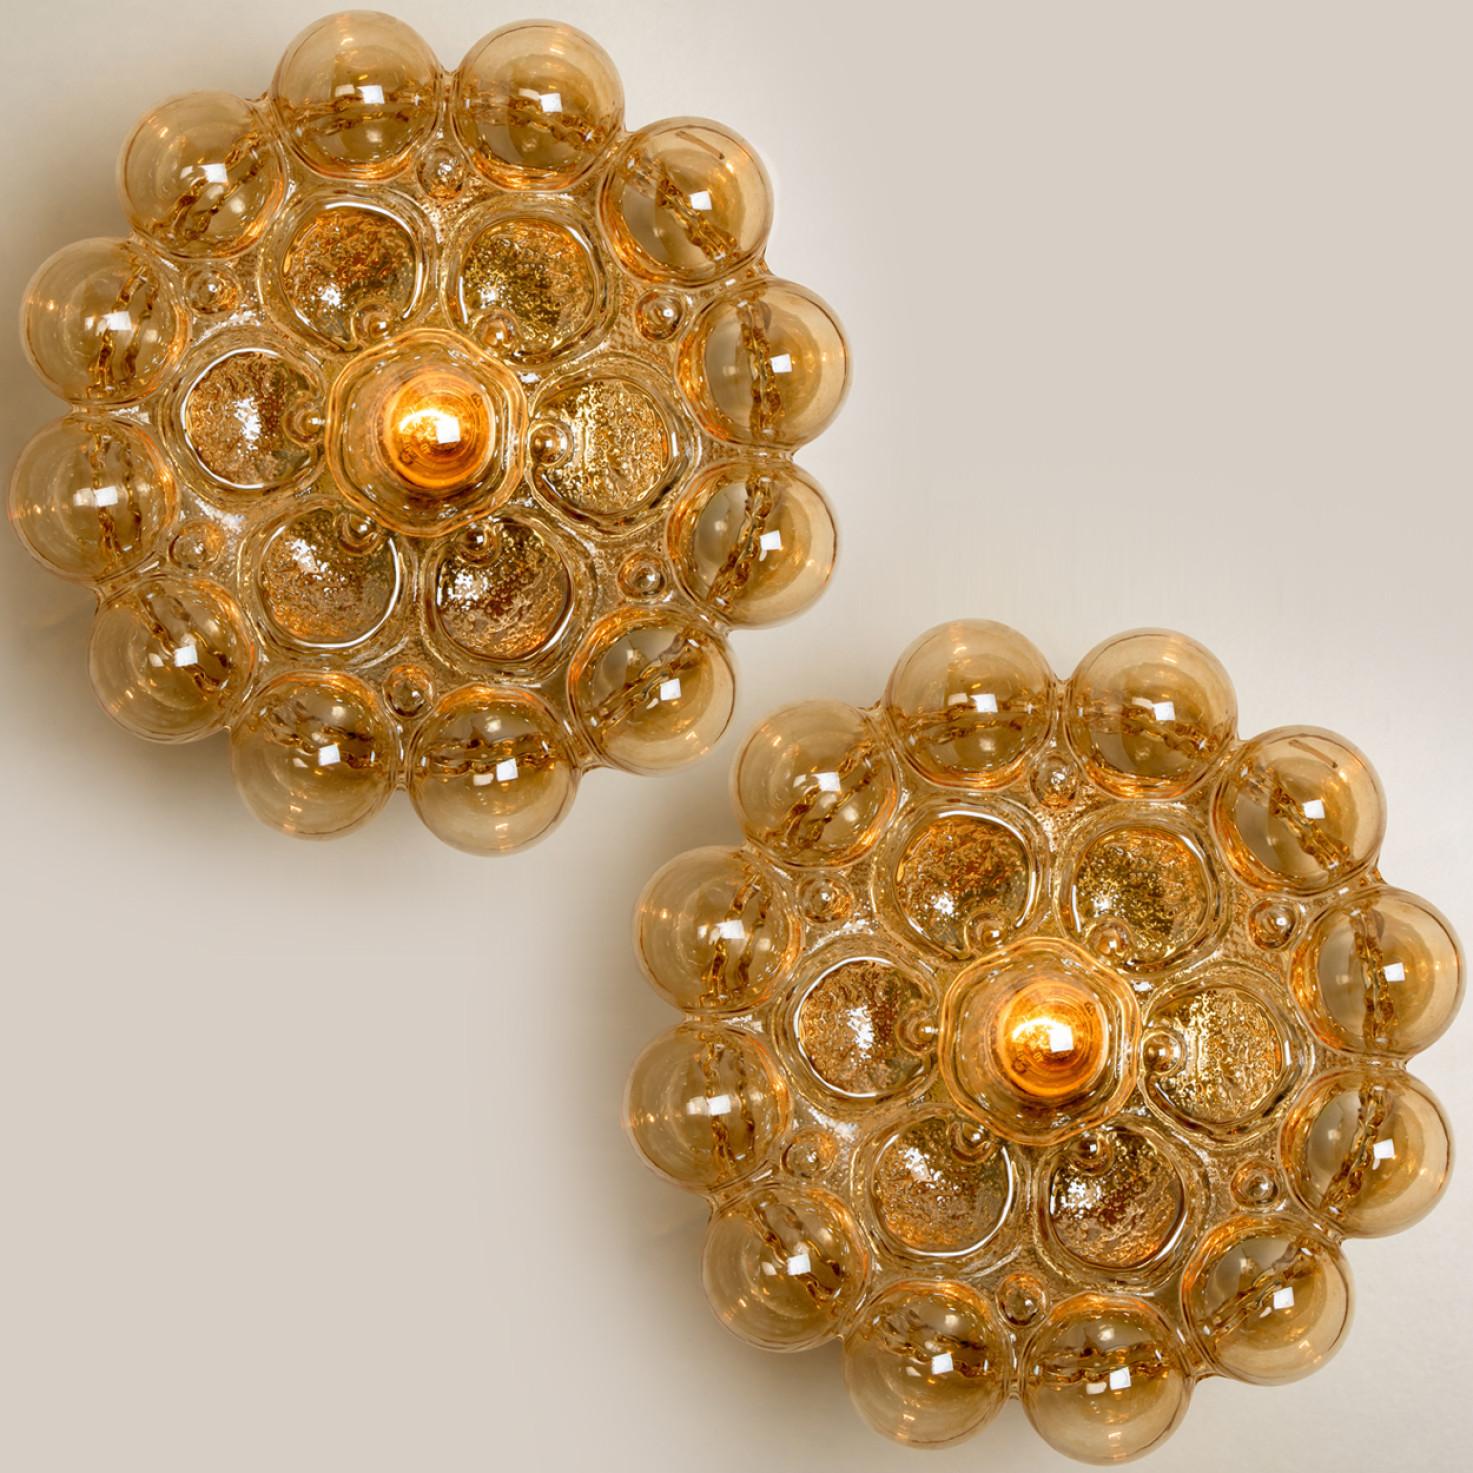 Beautiful high-end large bubble wall lights/ flush mounts by Helena Tynell for Glashütte Limburg, Germany, 1960s.
Made of glossy amber colored glass with a brass colored base. Illuminates beautifully.

The price is per piece. They will be sold